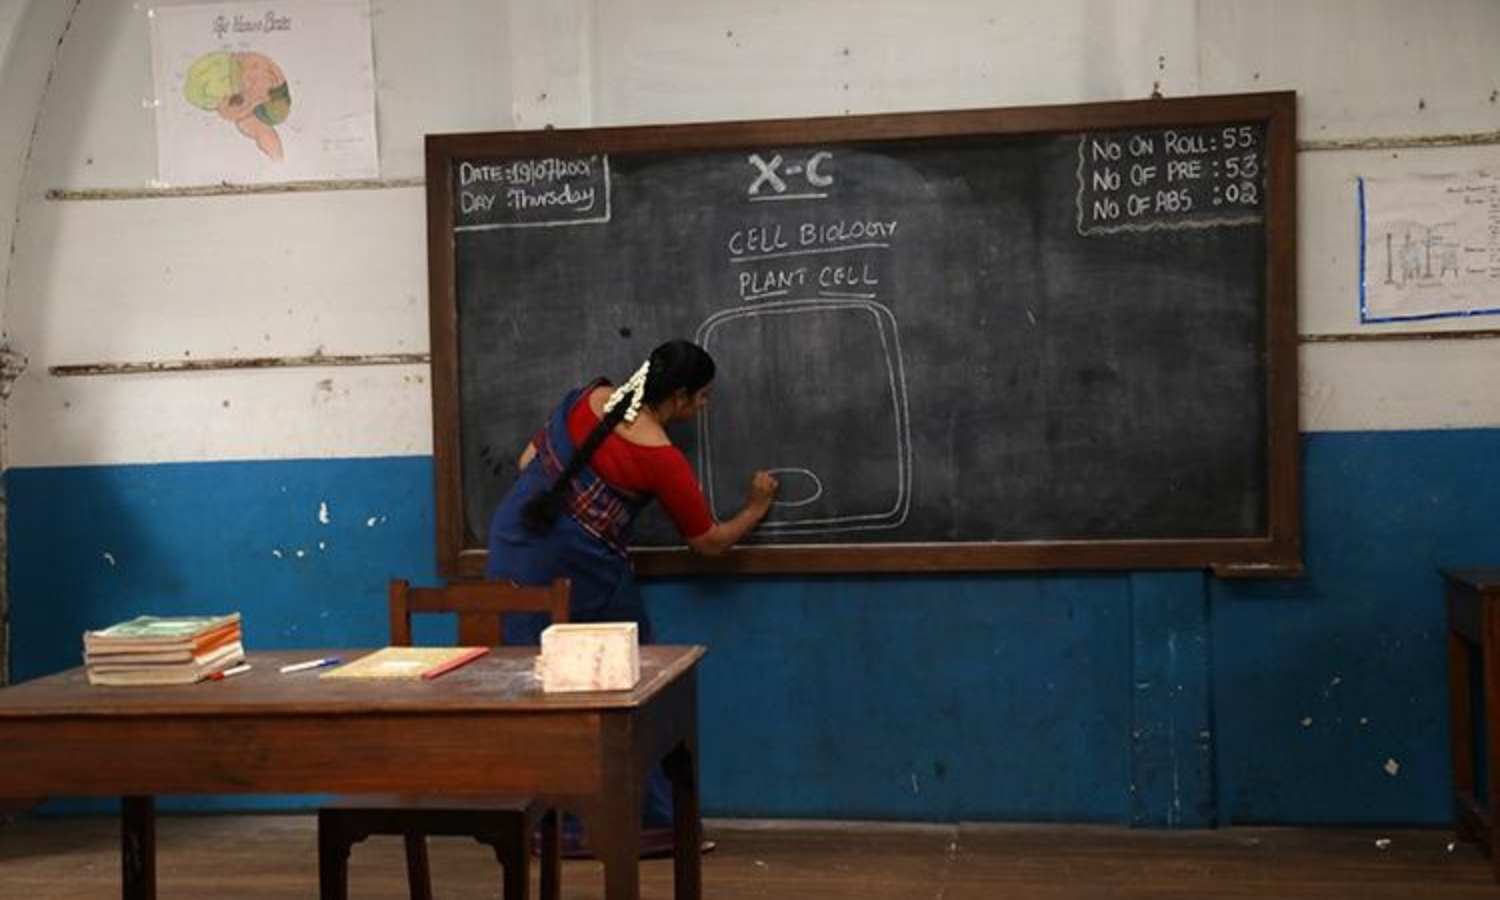 Keralaschoolgirlsex - Kerala School Teacher Resigns After Being Asked To 'Dress Appropriately':  The Sexualisation Of Bodies In Classrooms | Feminism in India